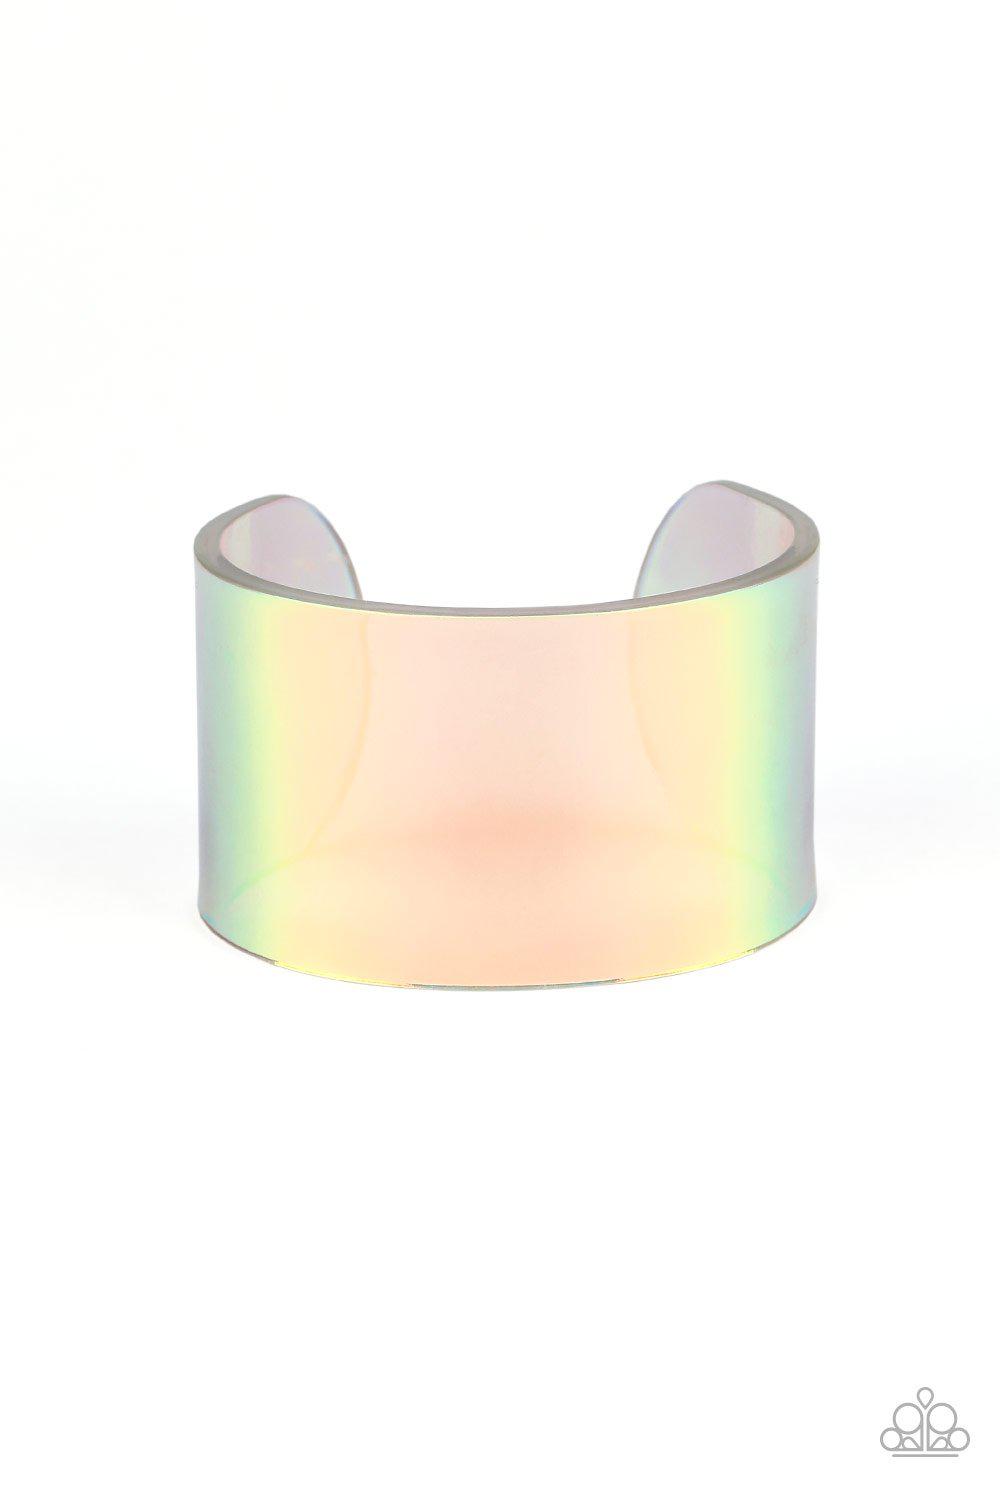 Holographic Aura Multi-colored Acrylic Cuff Bracelet - Paparazzi Accessories Convention Exclusive-CarasShop.com - $5 Jewelry by Cara Jewels